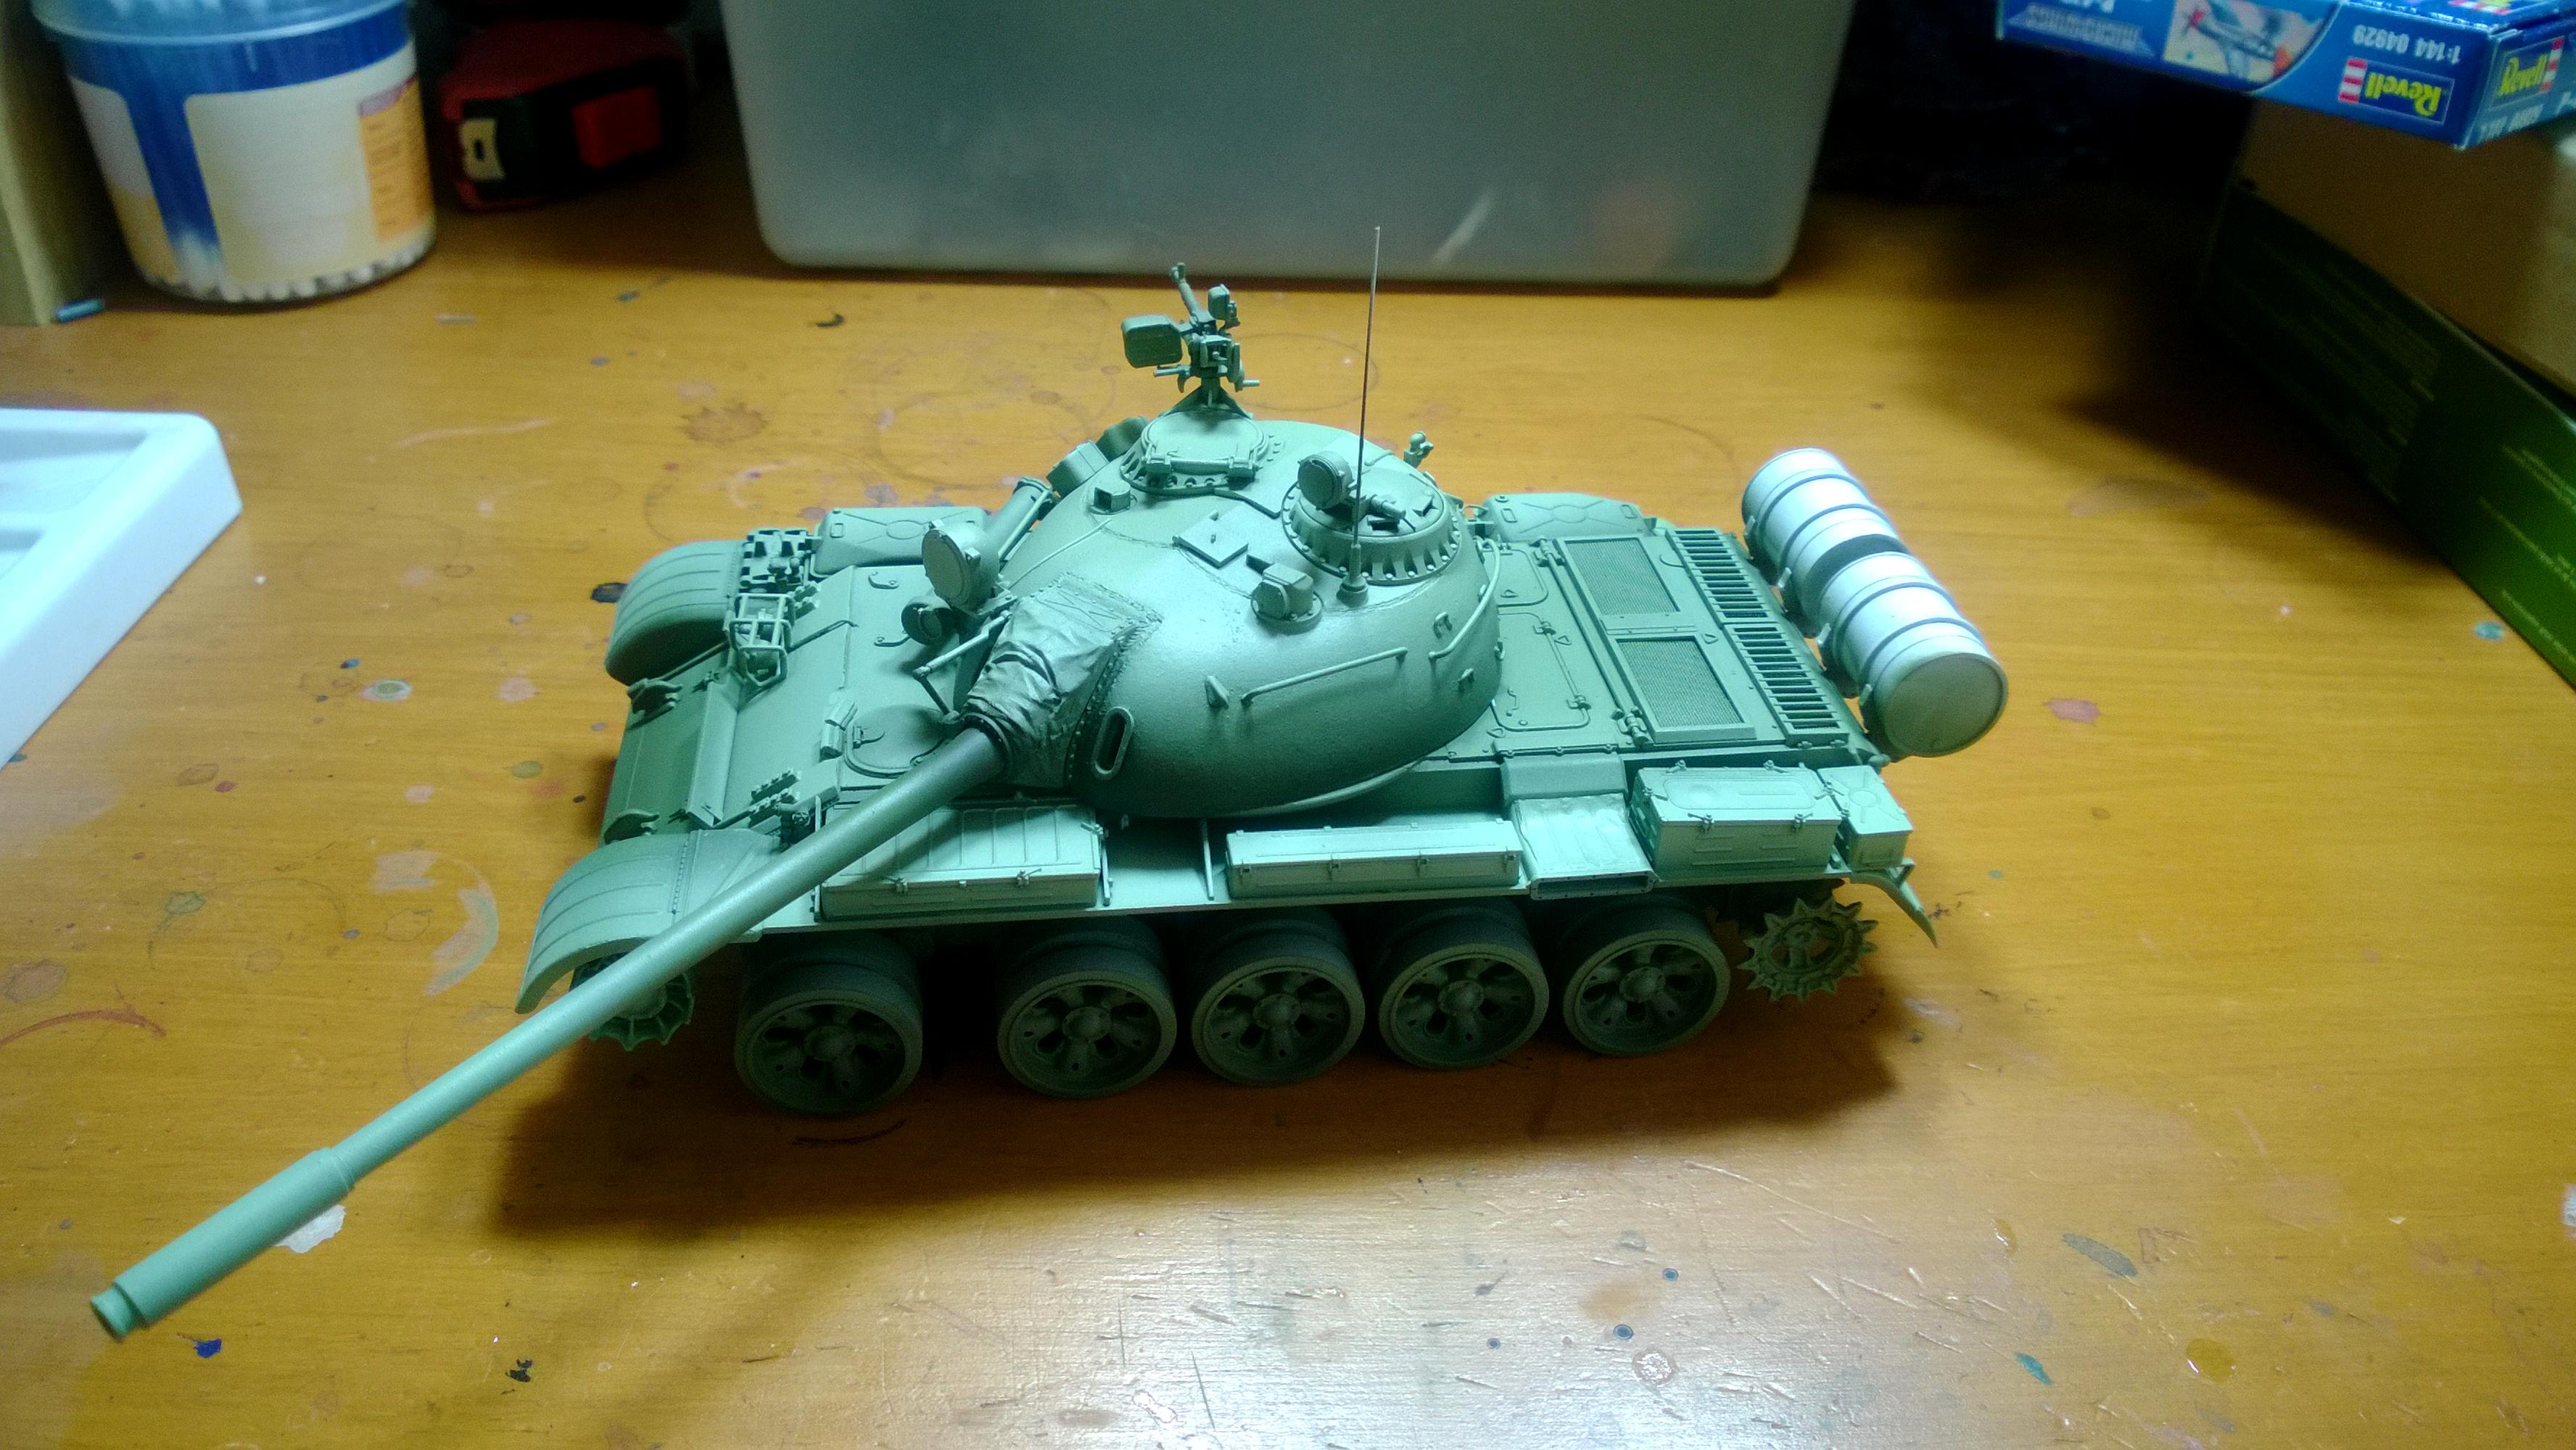 Flames Of War, Military Modelling, Panther F, Russians, T-55, Tiger, World War 2